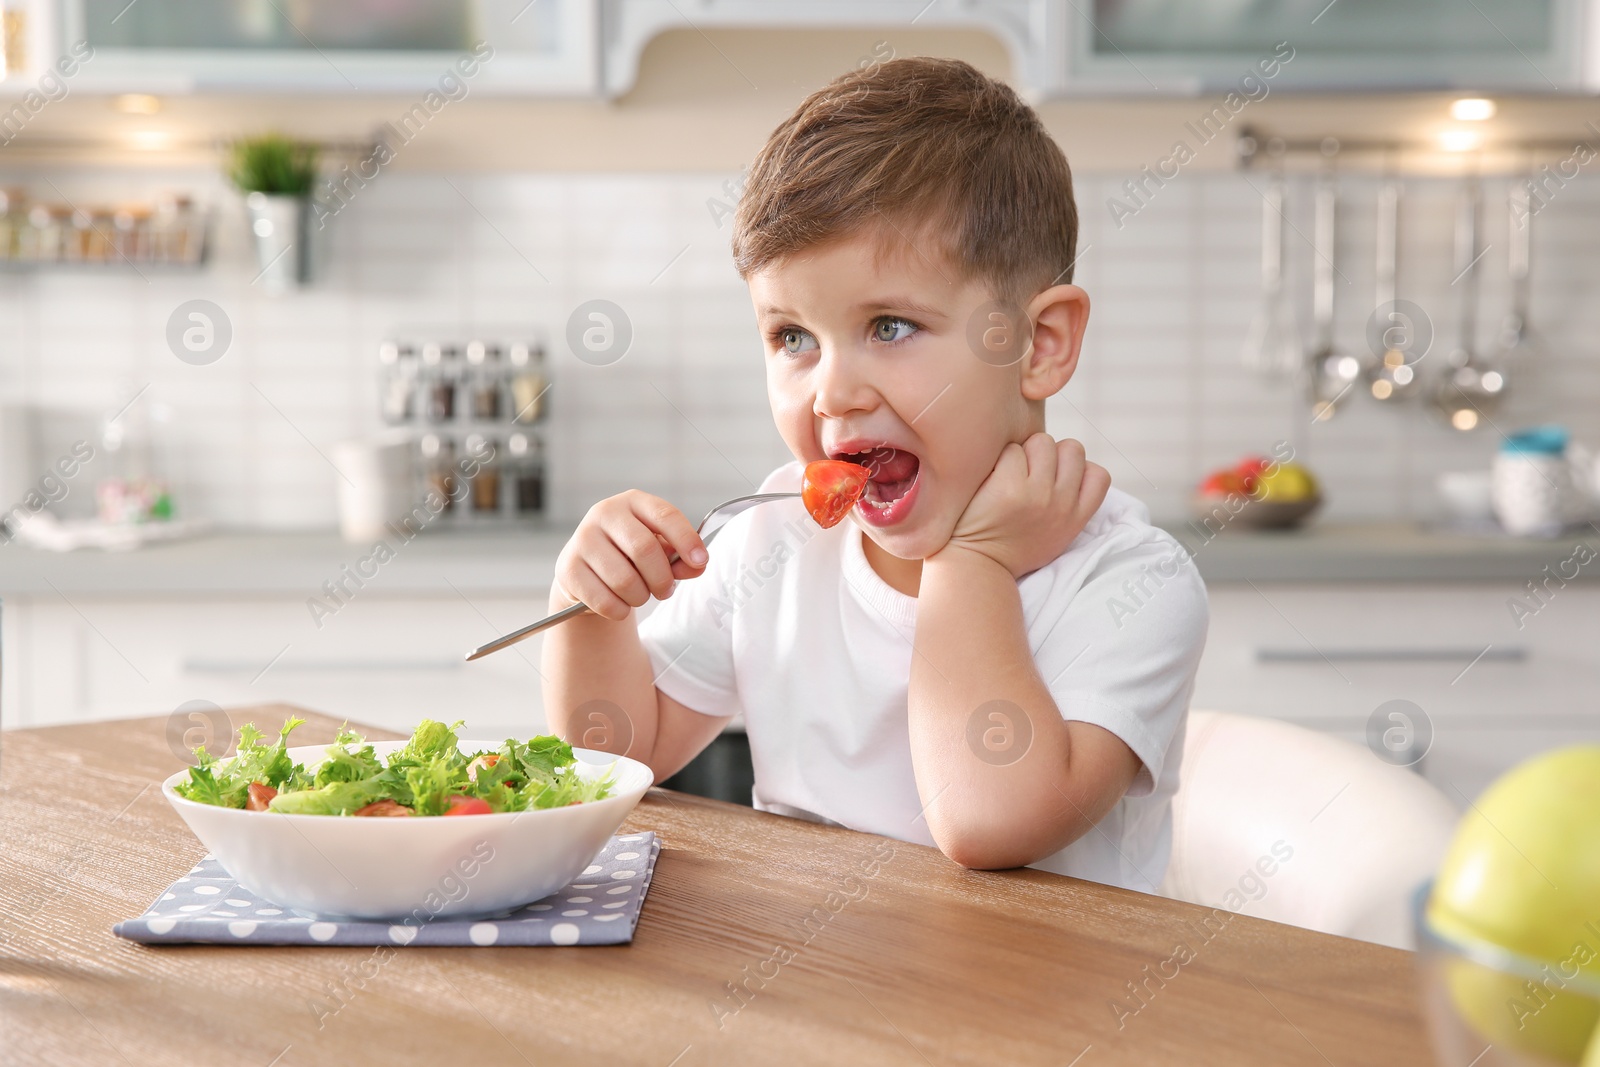 Photo of Adorable little boy eating vegetable salad at table in kitchen